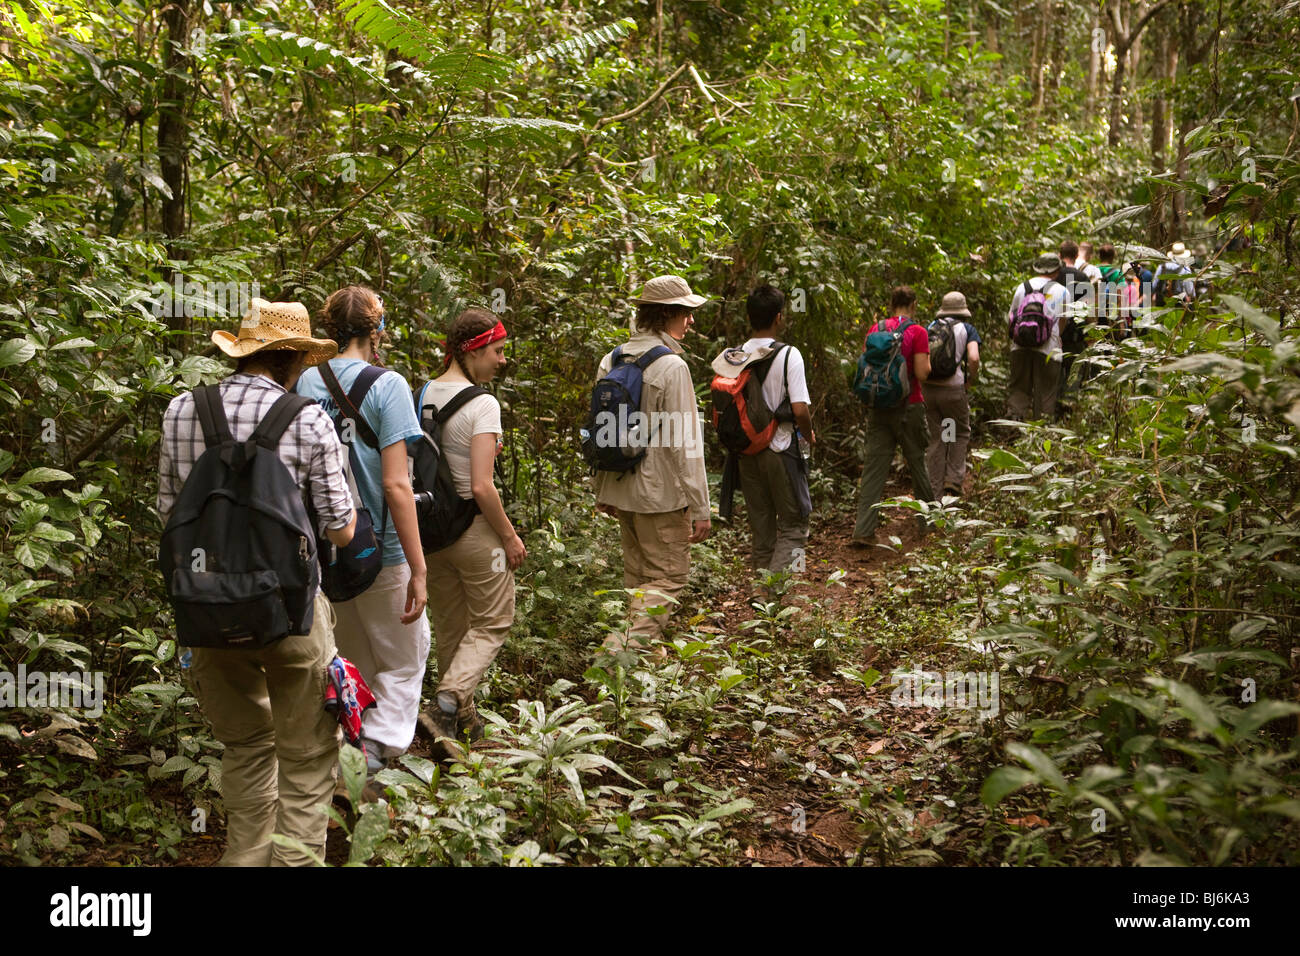 Indonesia, Sulawesi, Operation Wallacea, sixth form students, walking through forest on muddy path Stock Photo